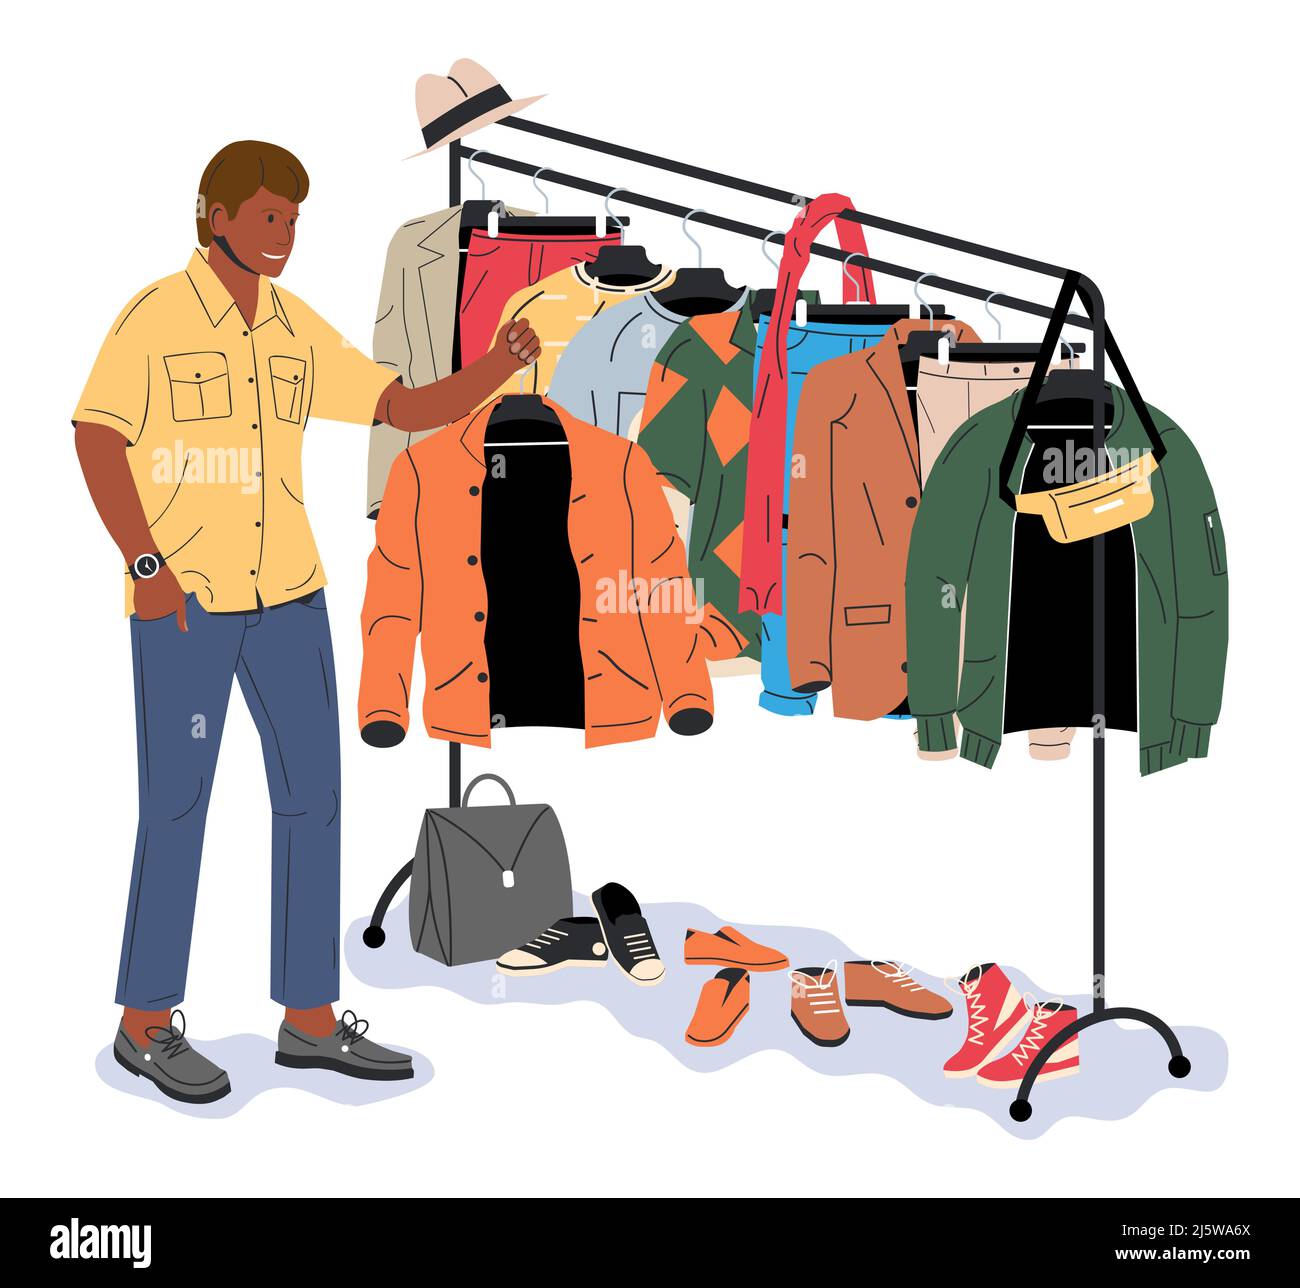 Clothes and Accessories Hanging on Hanger. Stock Vector